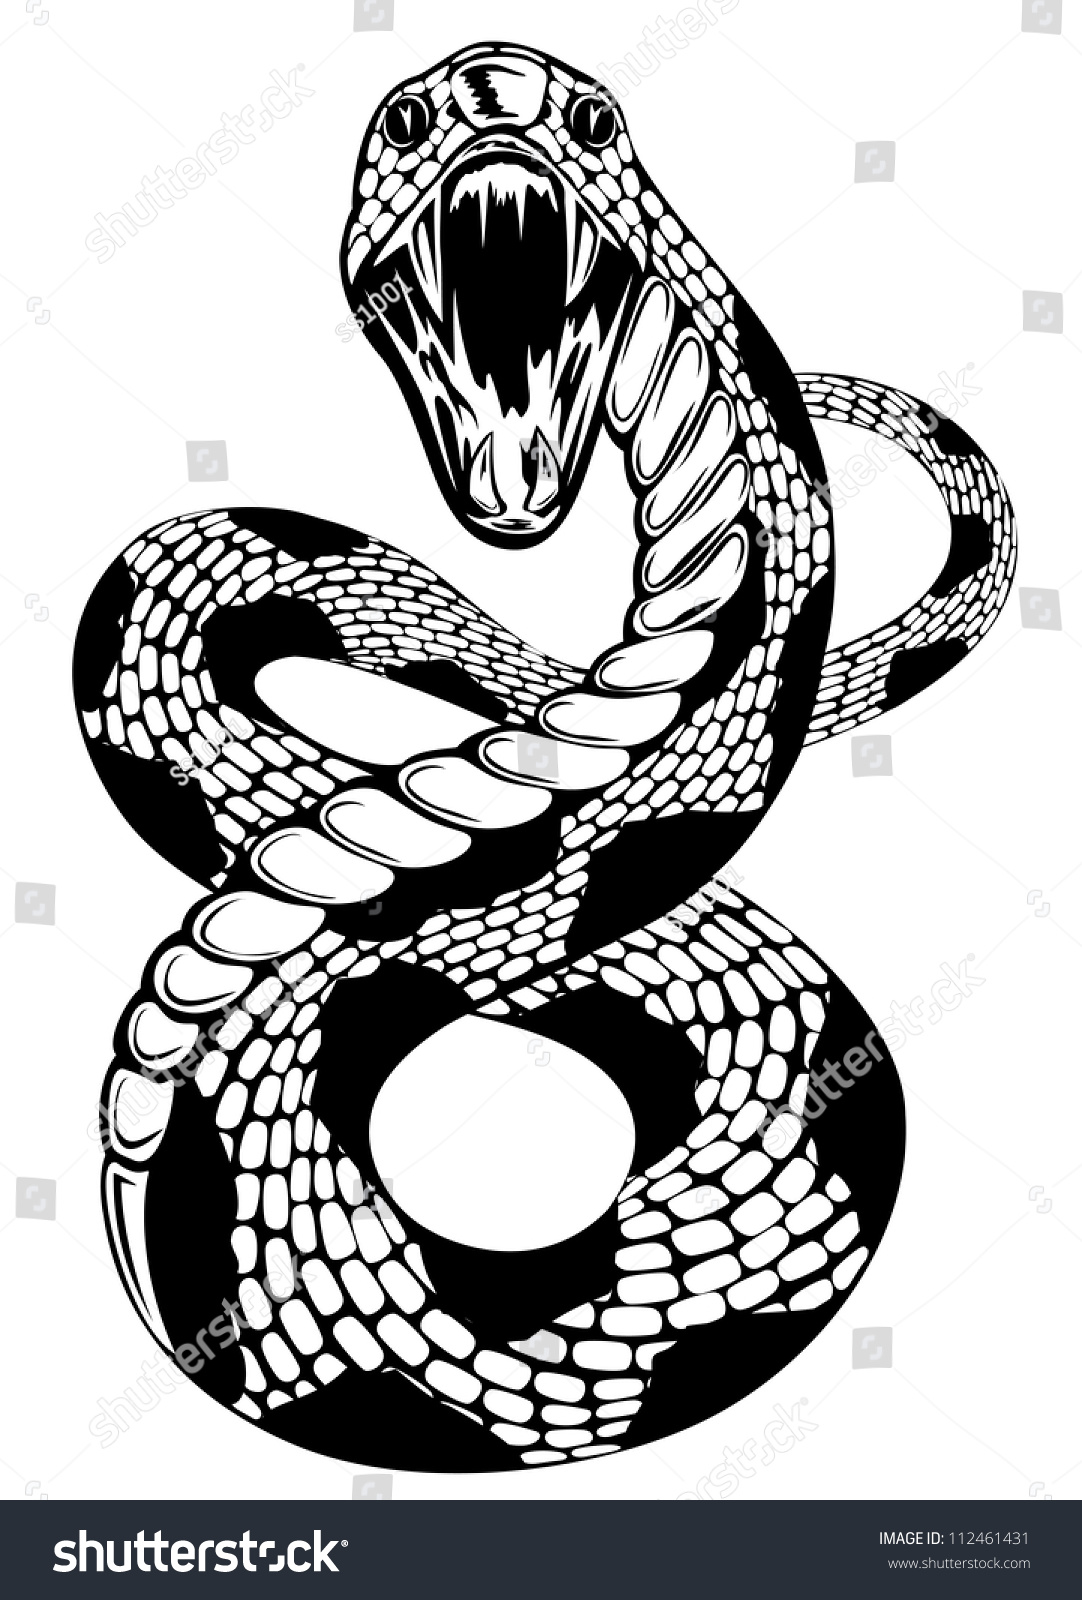 Vector Illustration Of Snake With An Open Mouth On White Background